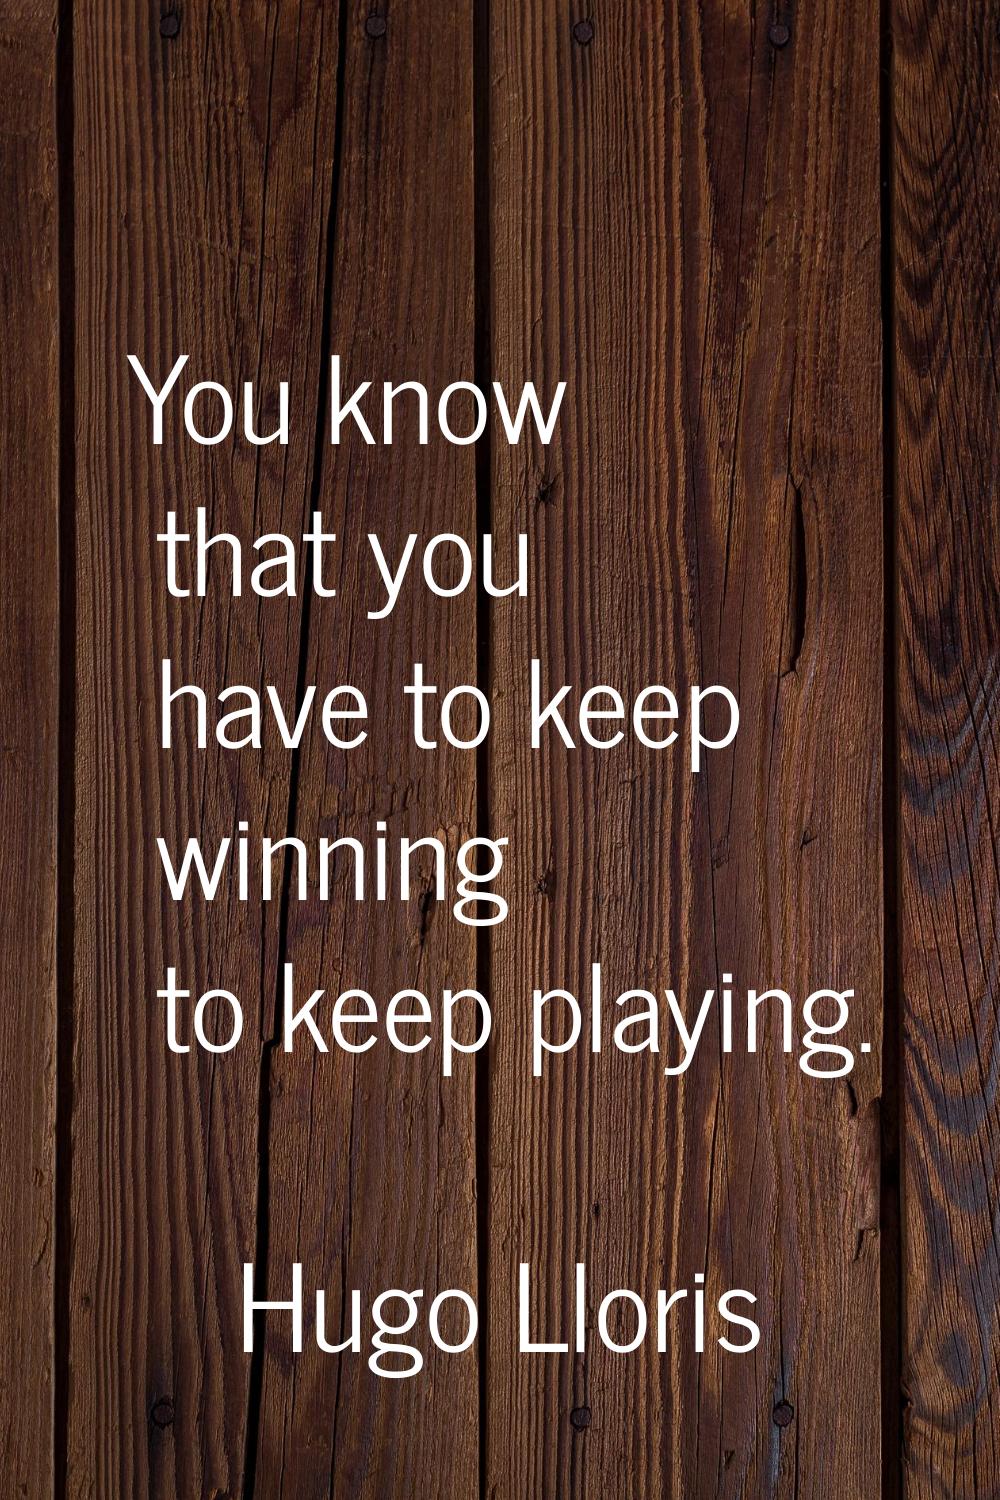 You know that you have to keep winning to keep playing.